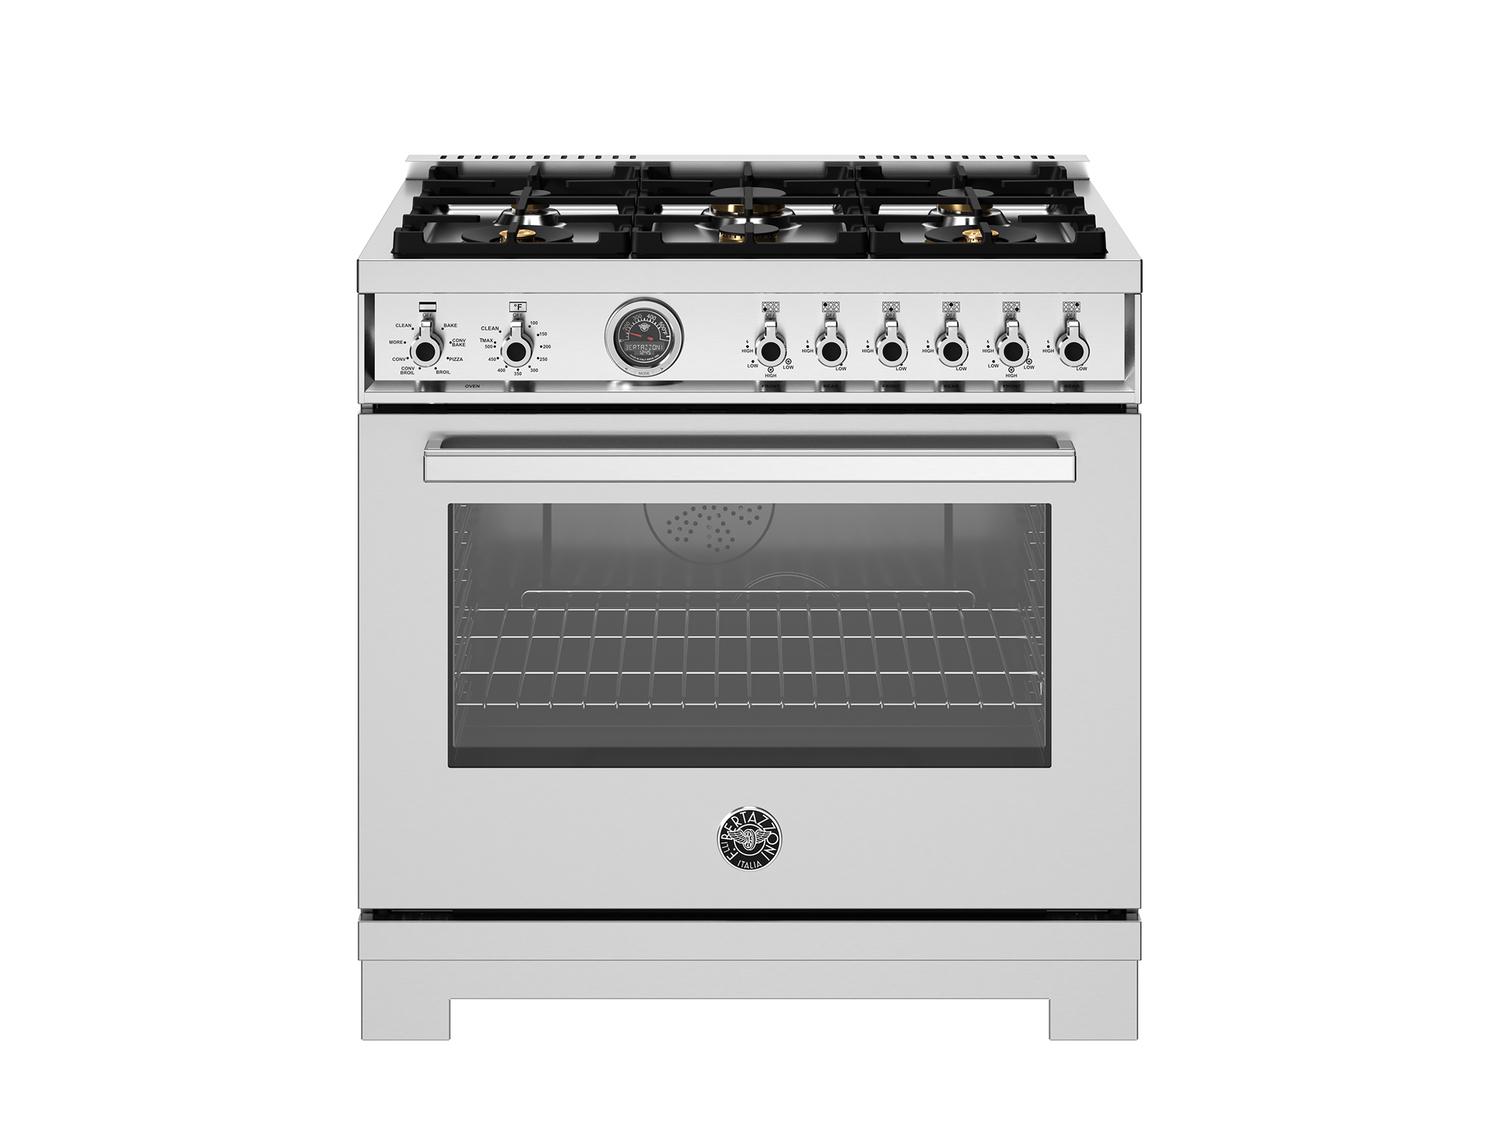 Bertazzoni PRO366BCFEPXT 36 Inch Dual Fuel Range, 6 Brass Burners And Cast Iron Griddle, Electric Self-Clean Oven Stainless Steel